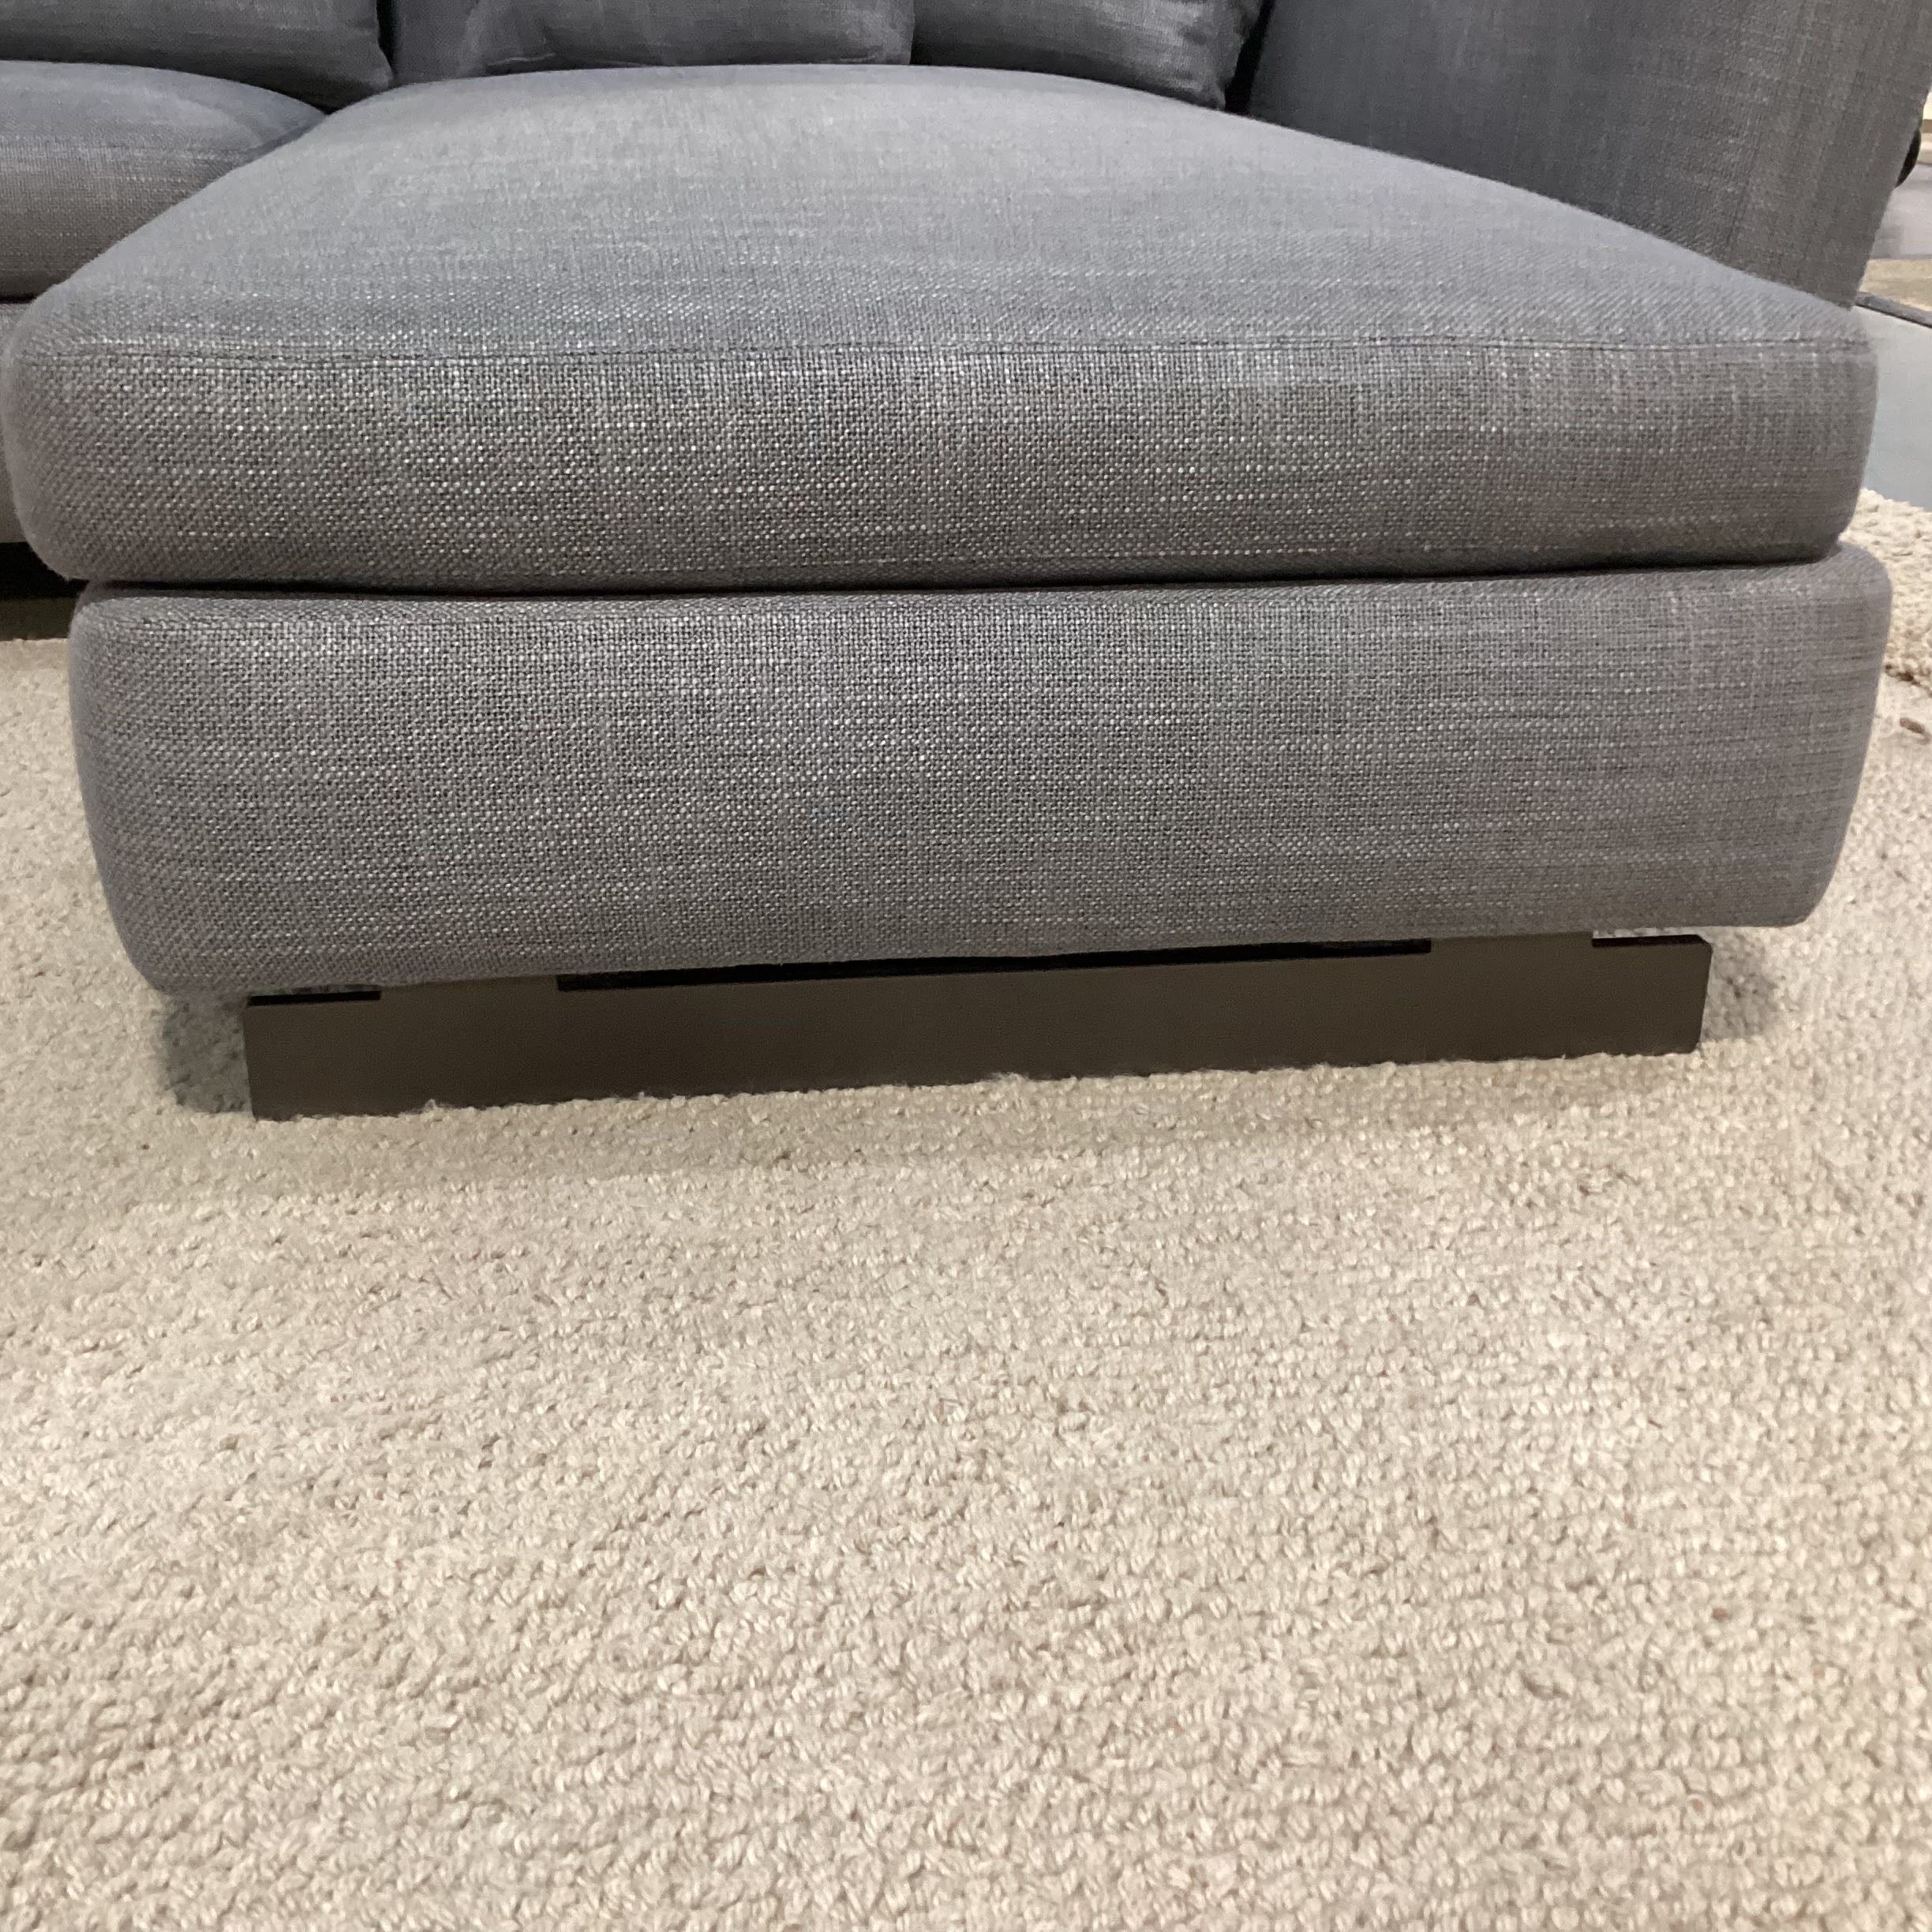 Minotti Italian Modern Grey Woven 2 Piece with Chaise Sectional